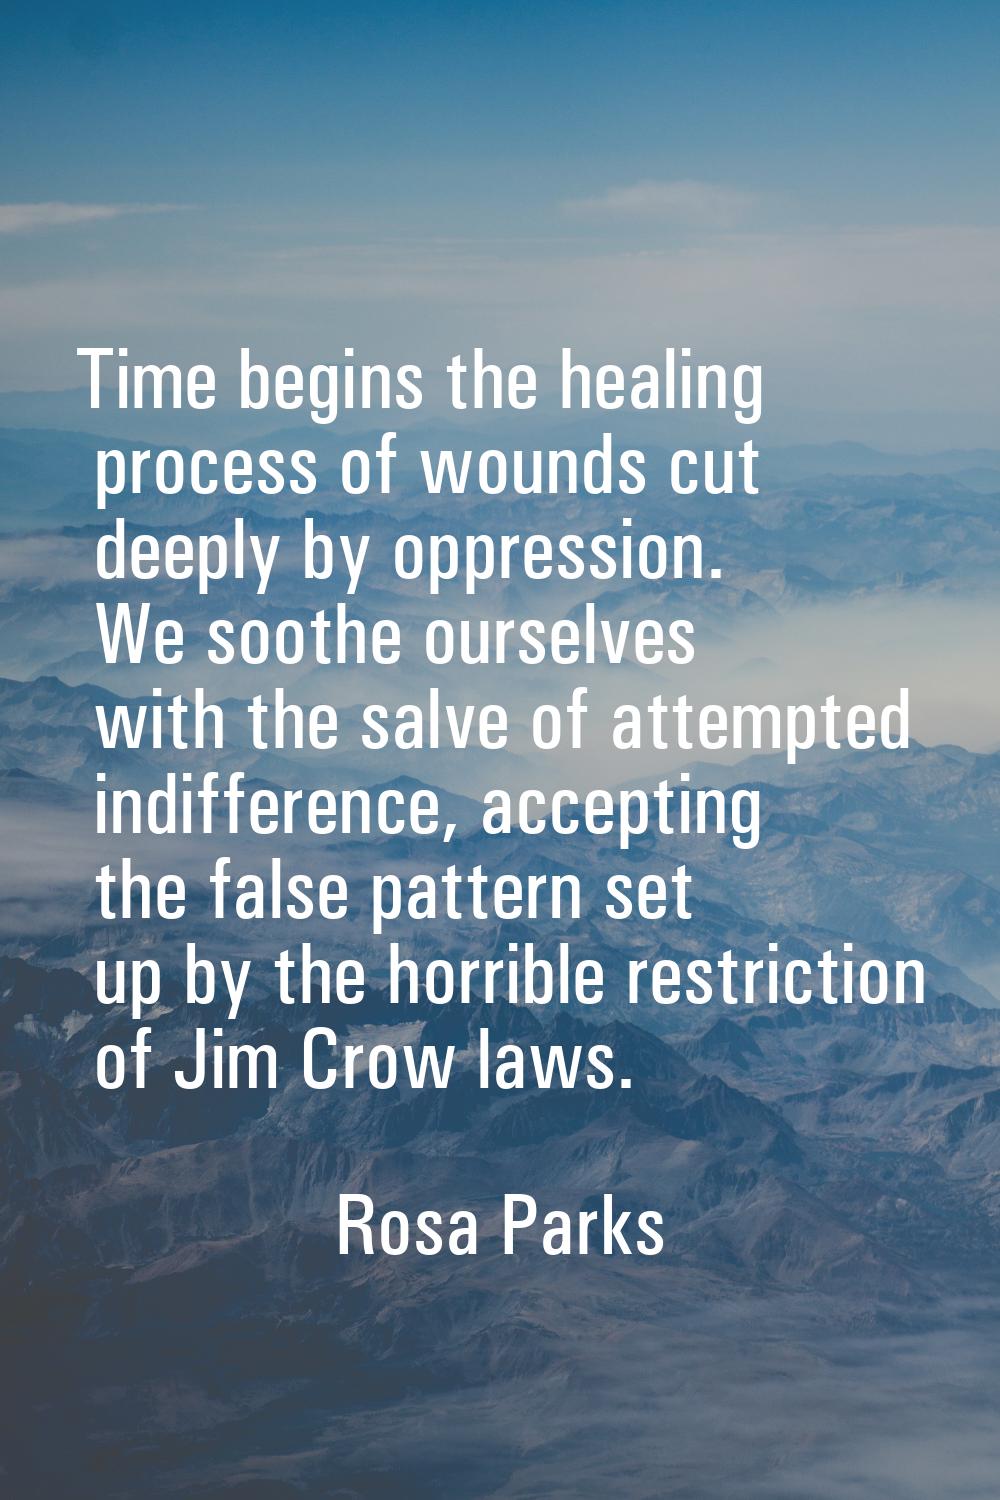 Time begins the healing process of wounds cut deeply by oppression. We soothe ourselves with the sa